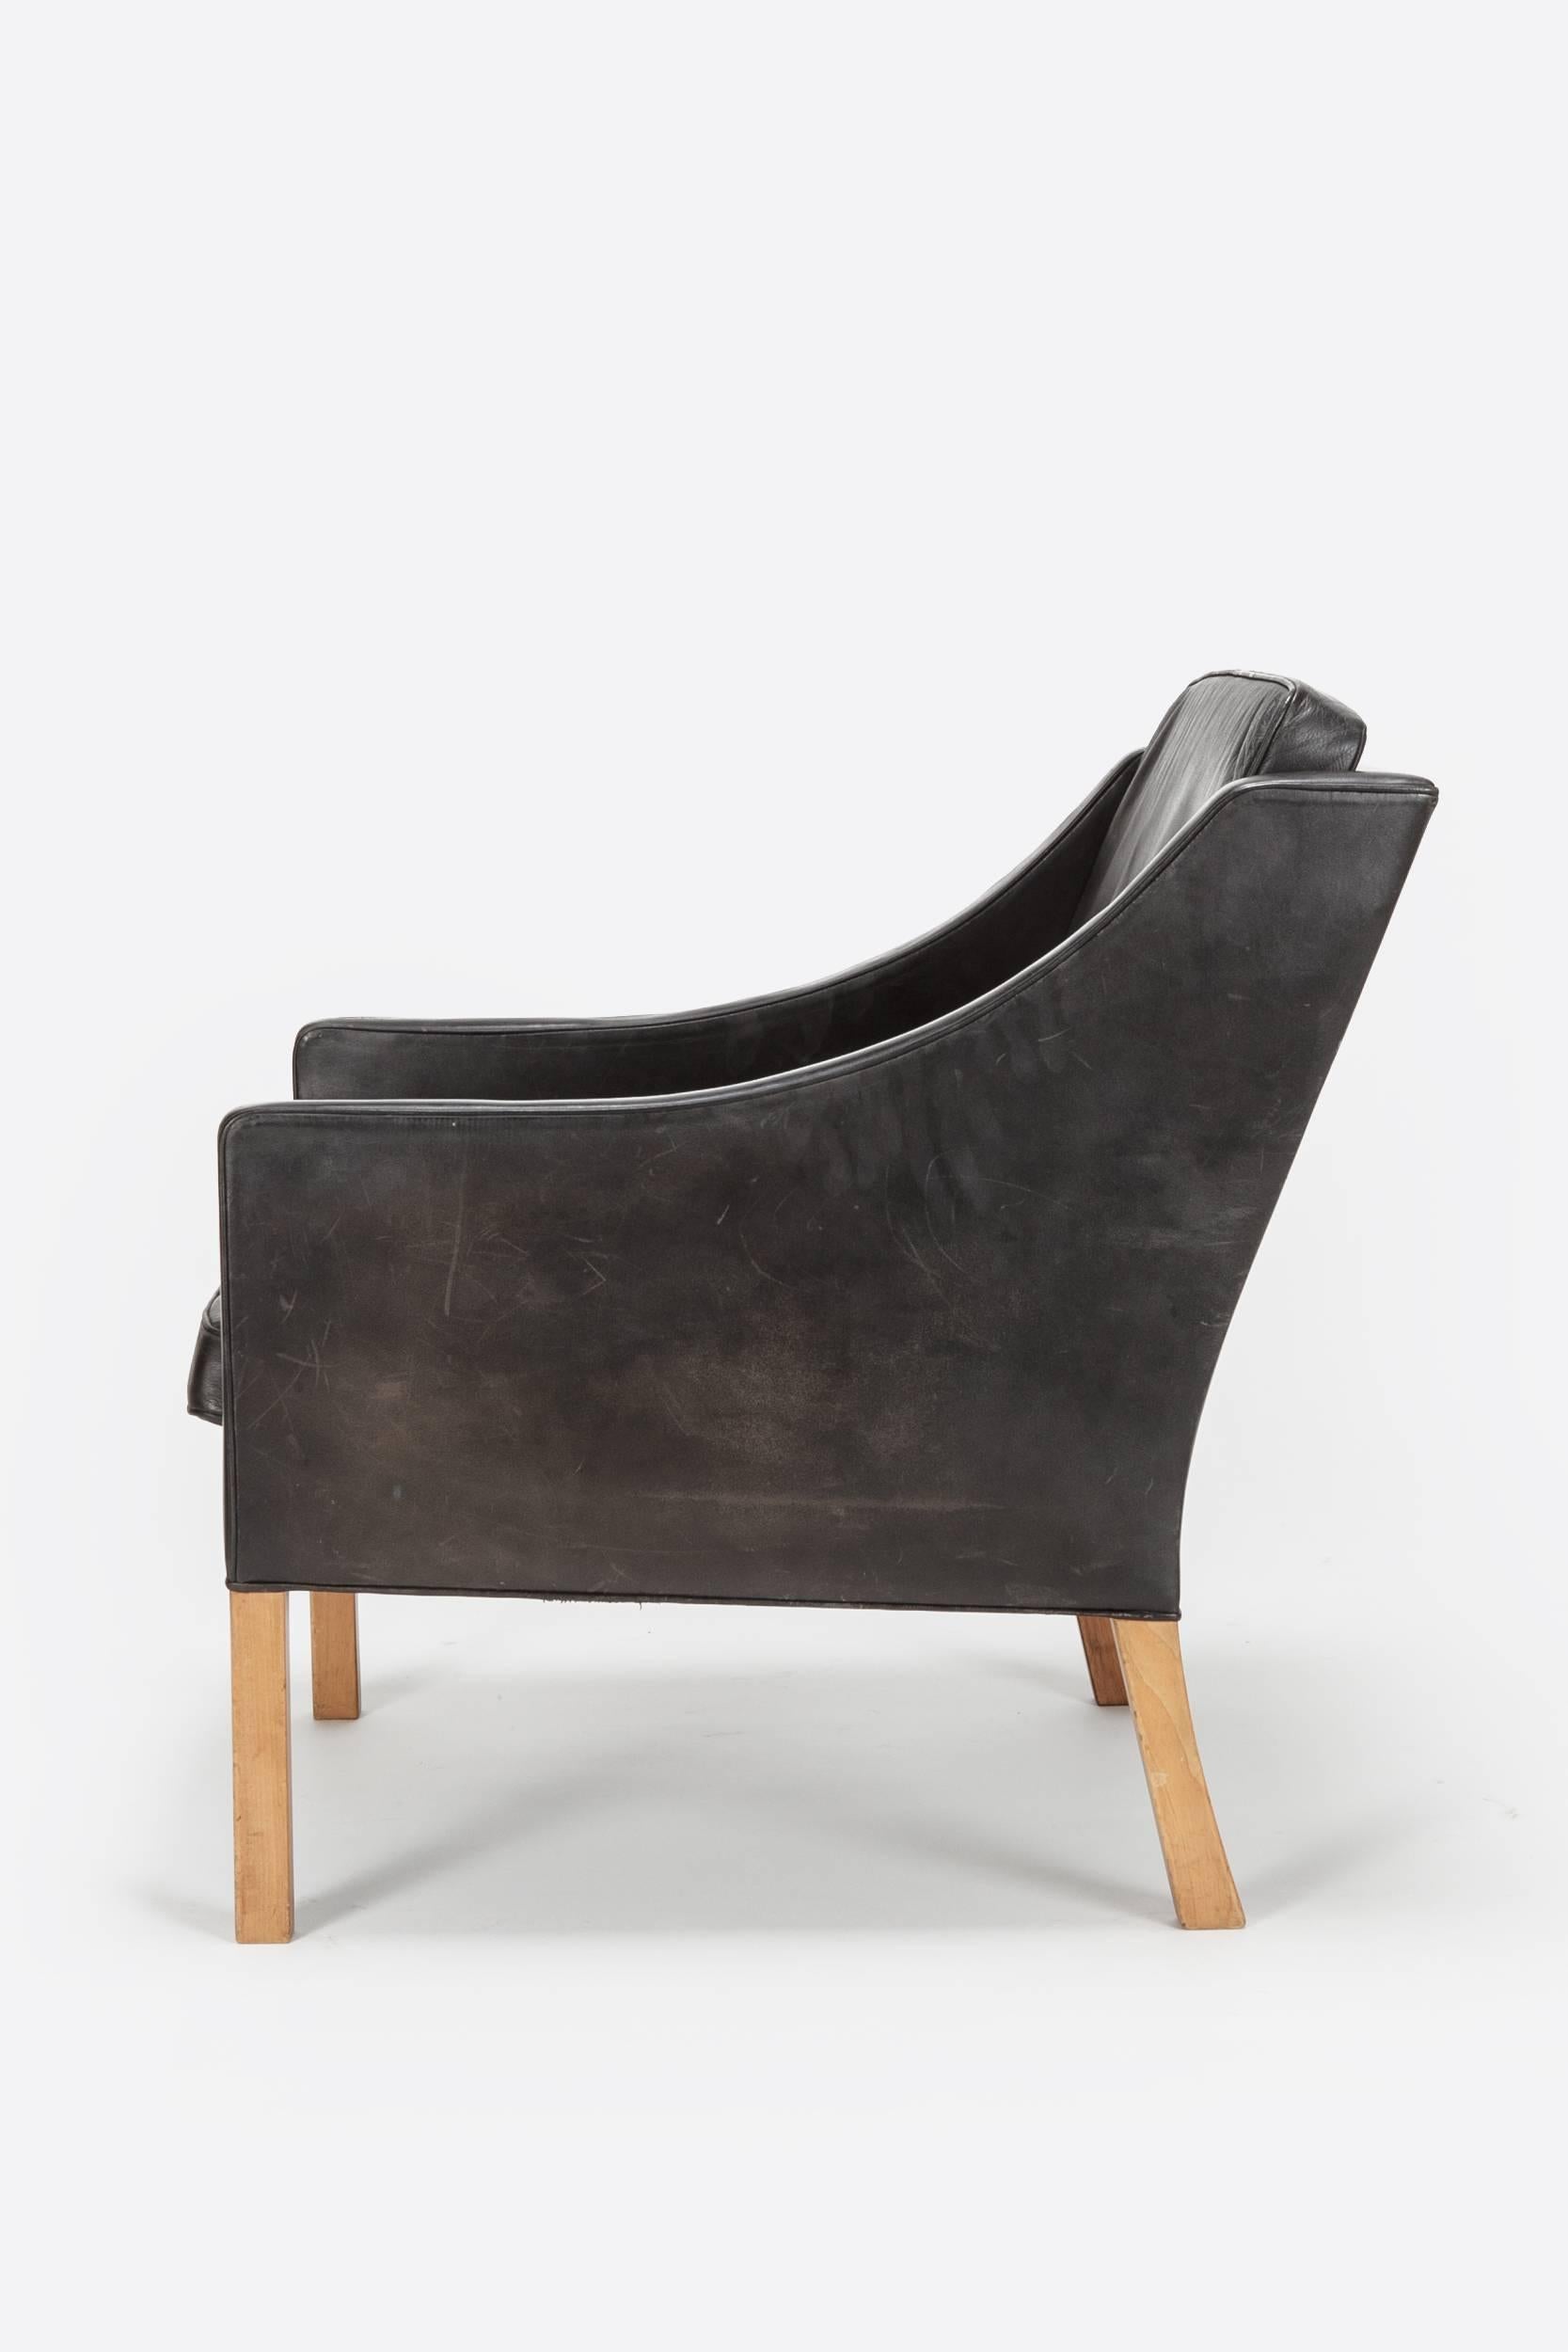 Mid-Century Modern Borge Mogensen Lounge Chair 2207 for Fredericia, 1963